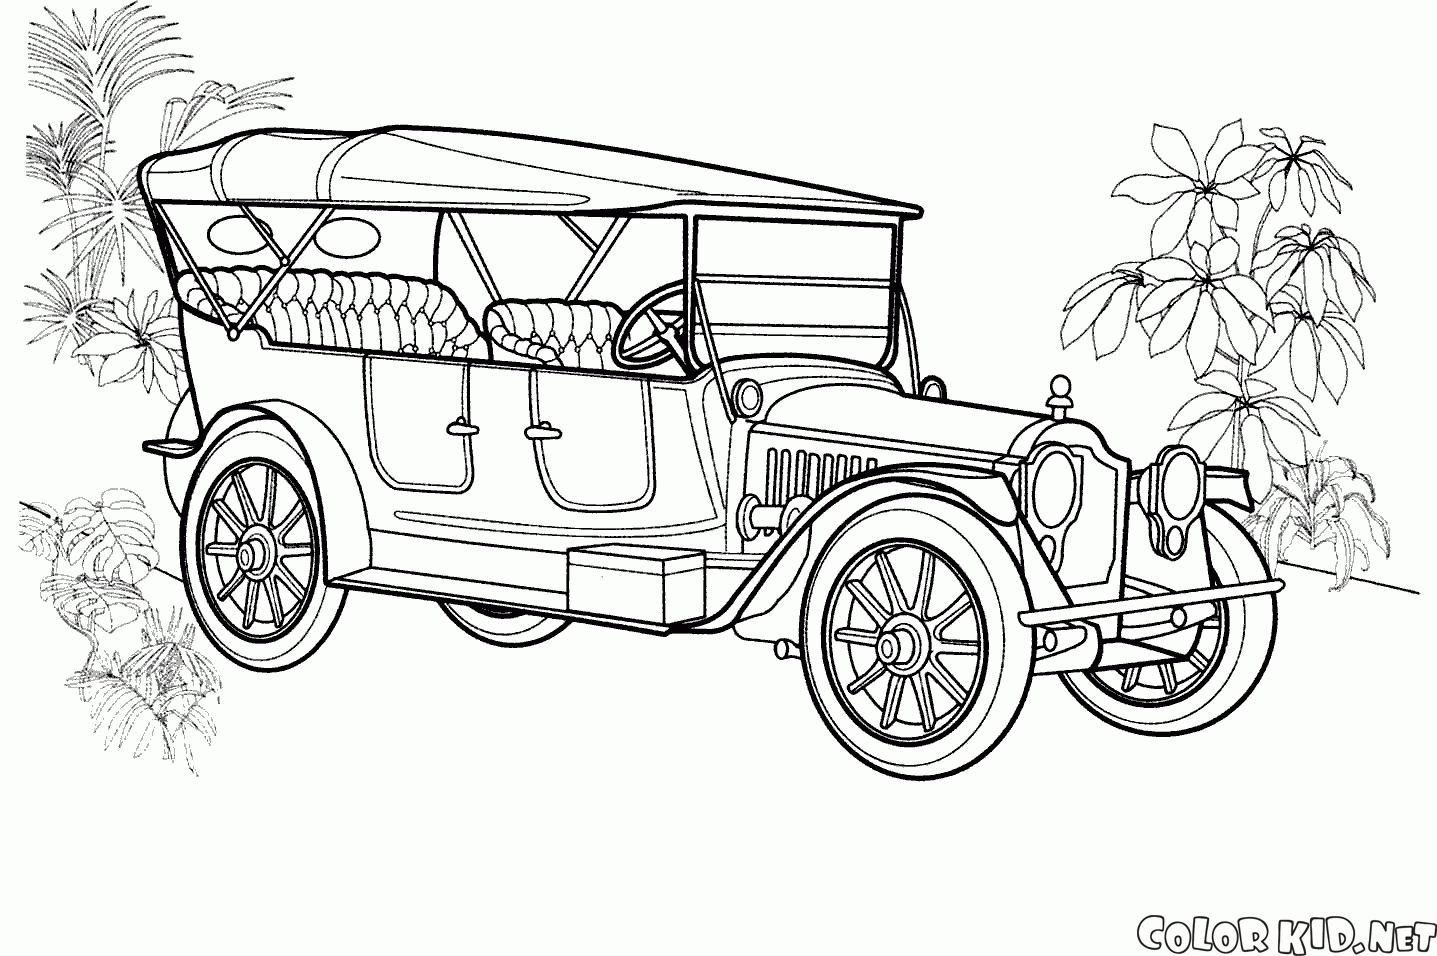 Coloring page - Antique cars